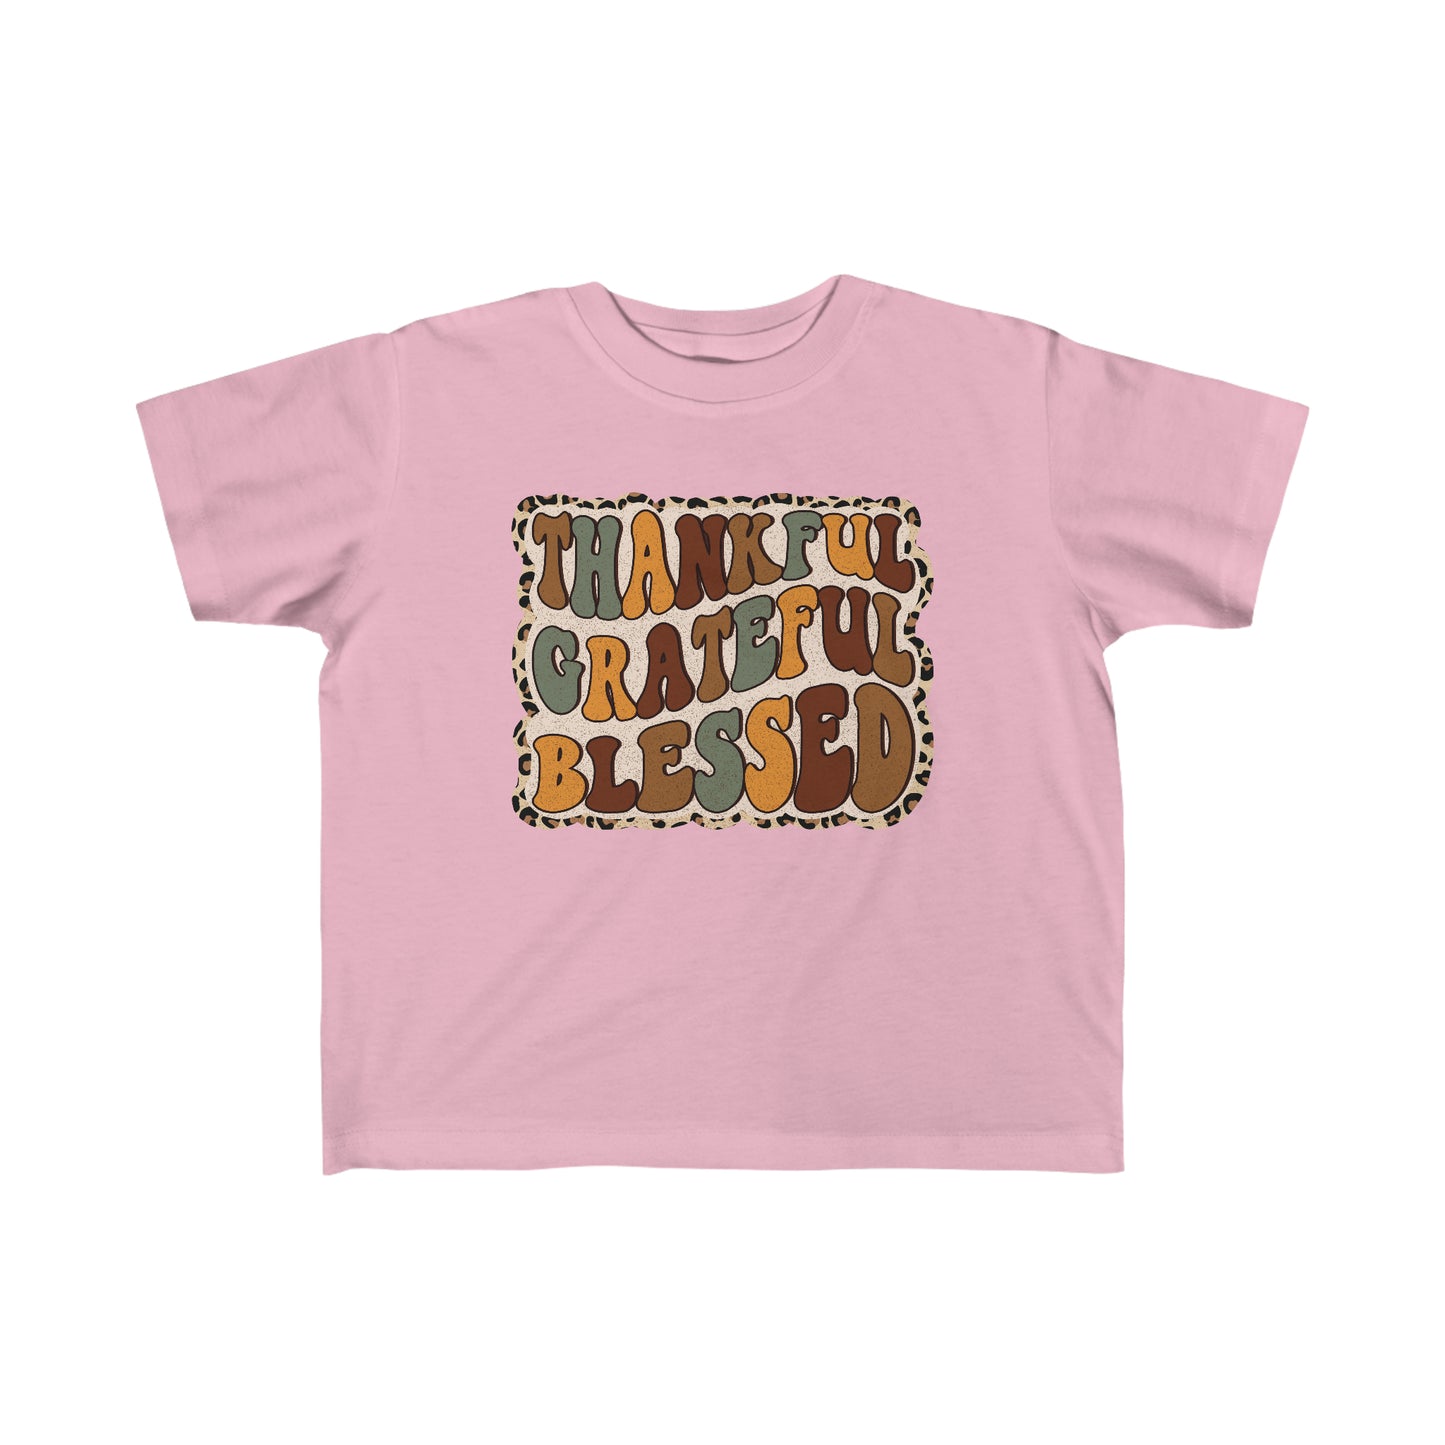 Thankful Grateful and Blessed Toddler's Fine Jersey Tee